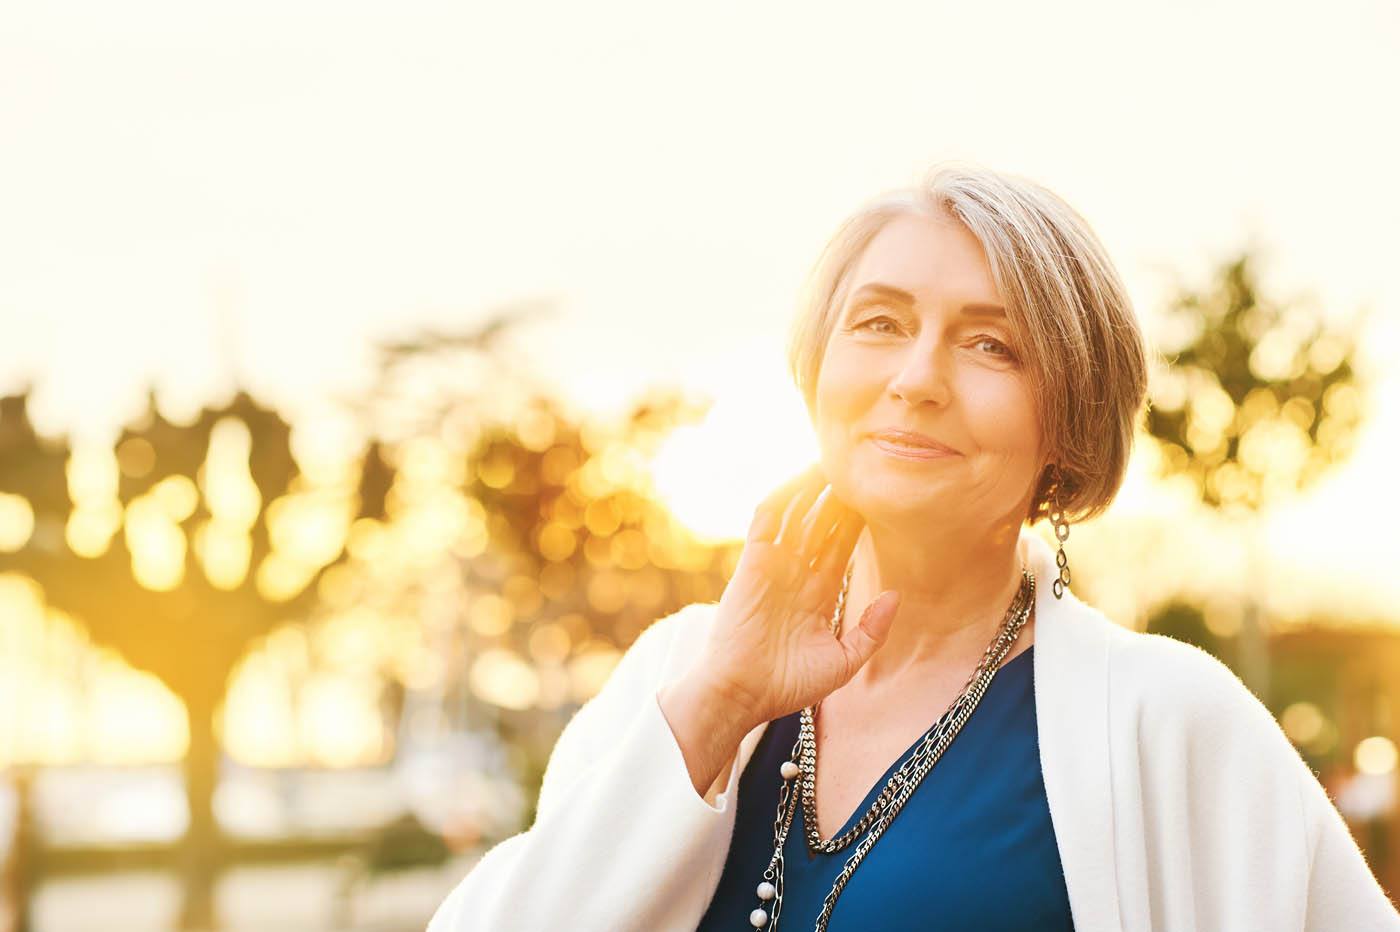 An women with radiating skin in her late 40s standing in front of a sunset, learn the benefits of our photofacial near you.